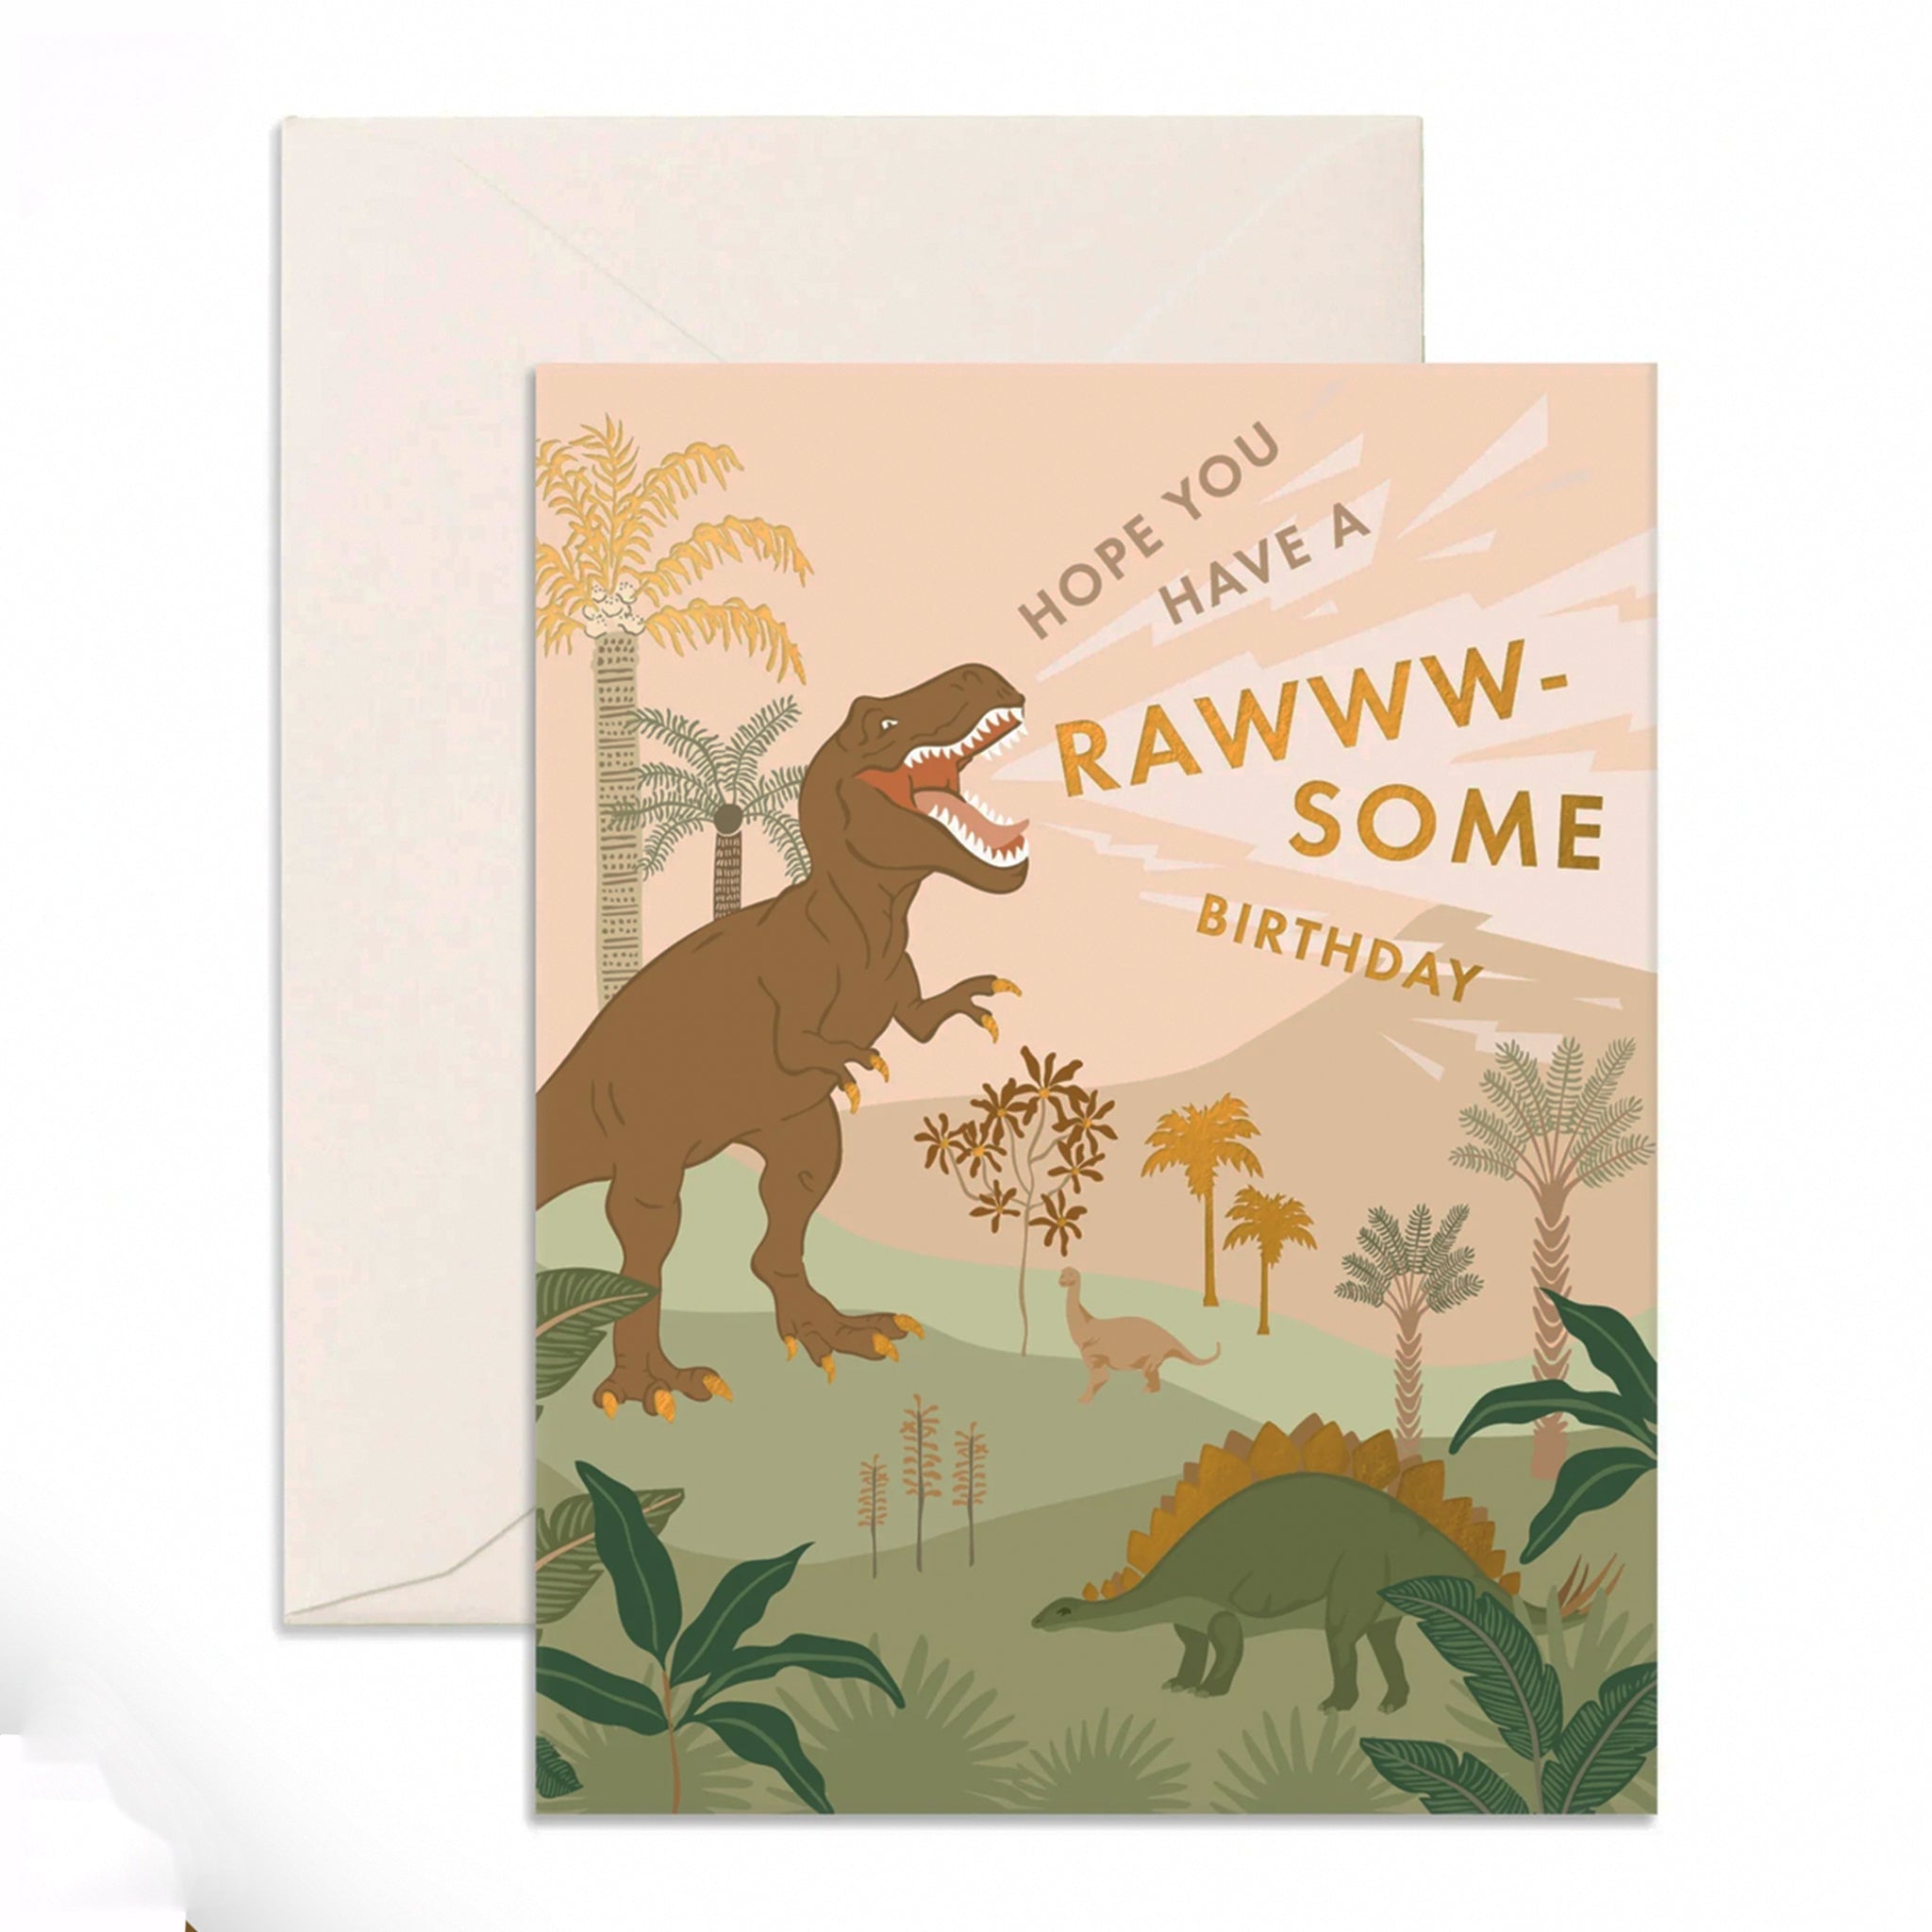 On a white background is a birthday card with a graphic of dinosaurs in a tropical landscape with gold foiled text that reads, "Hope You Have A Rawww-Some Birthday".